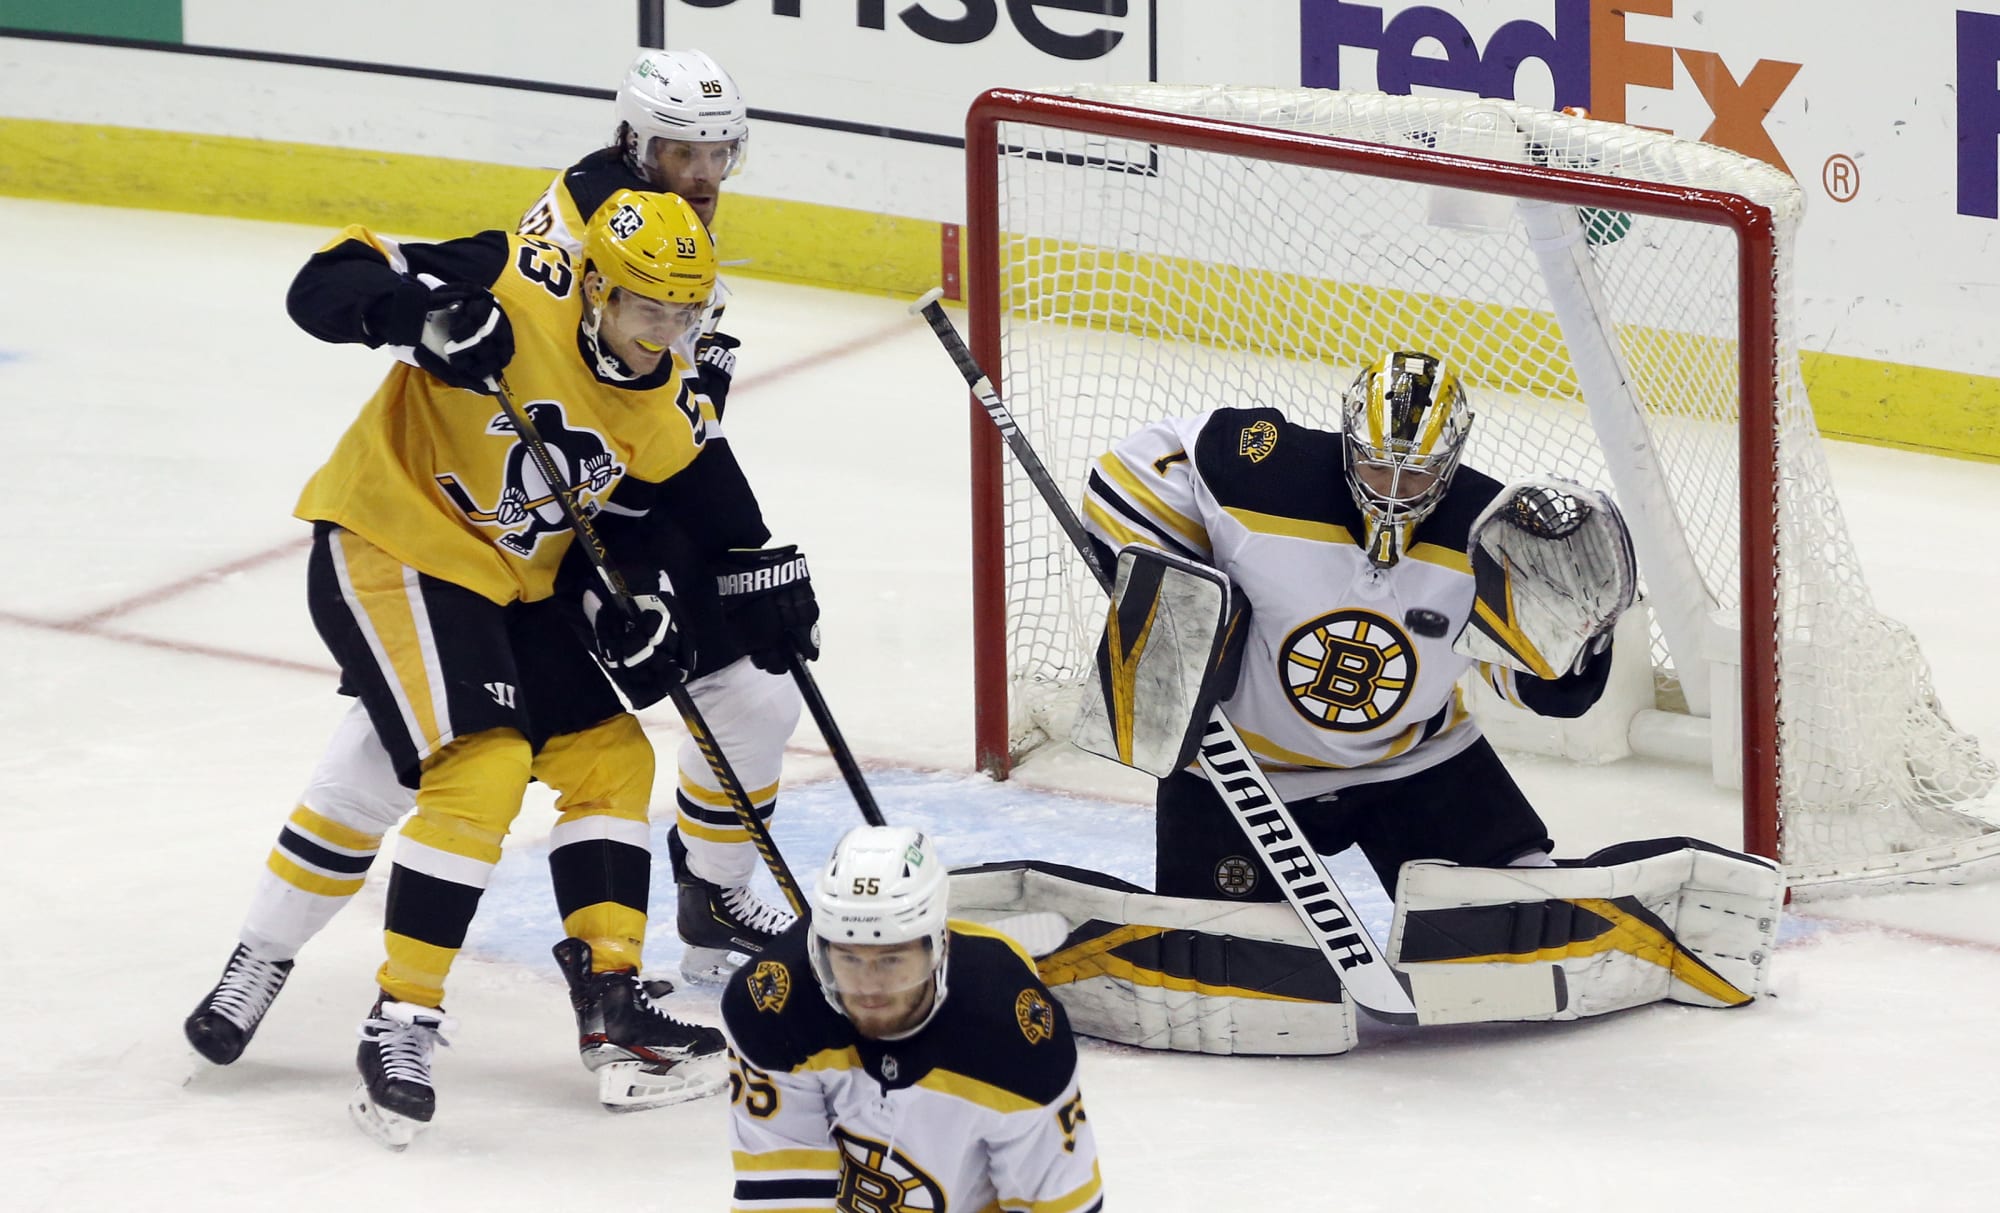 Jeremy Swayman stops 33 shots, leads Bruins to 3-2 win – Saratogian